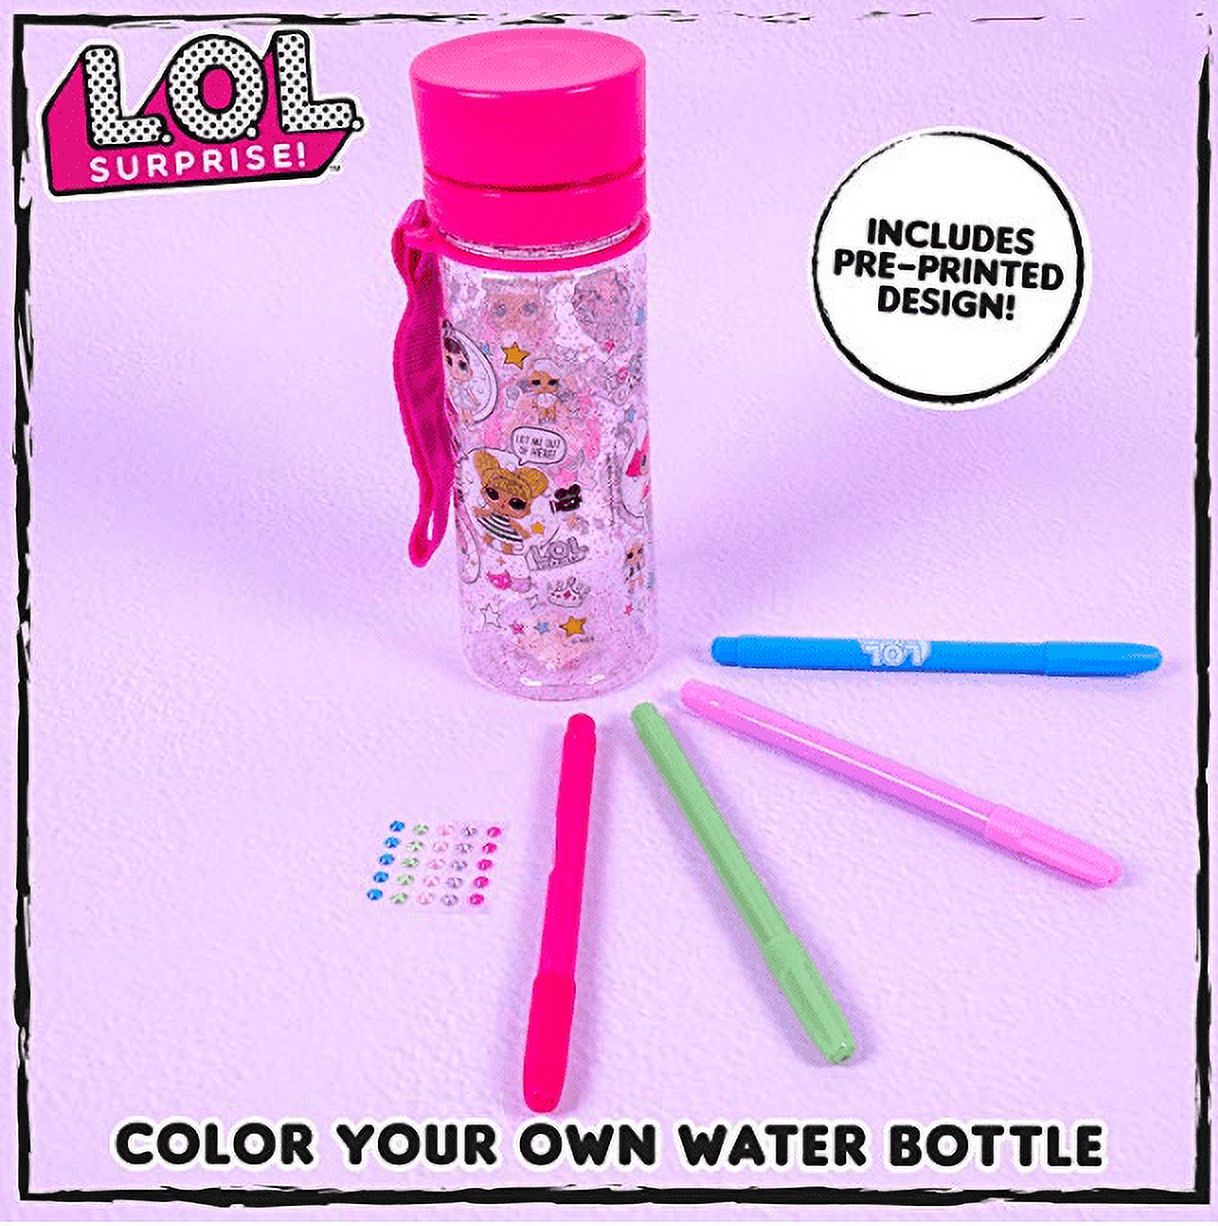 L.O.L. Surprise! Color Your Own Glitter Water Bottle for Kids Ages 5+, BPA-Free - image 2 of 6